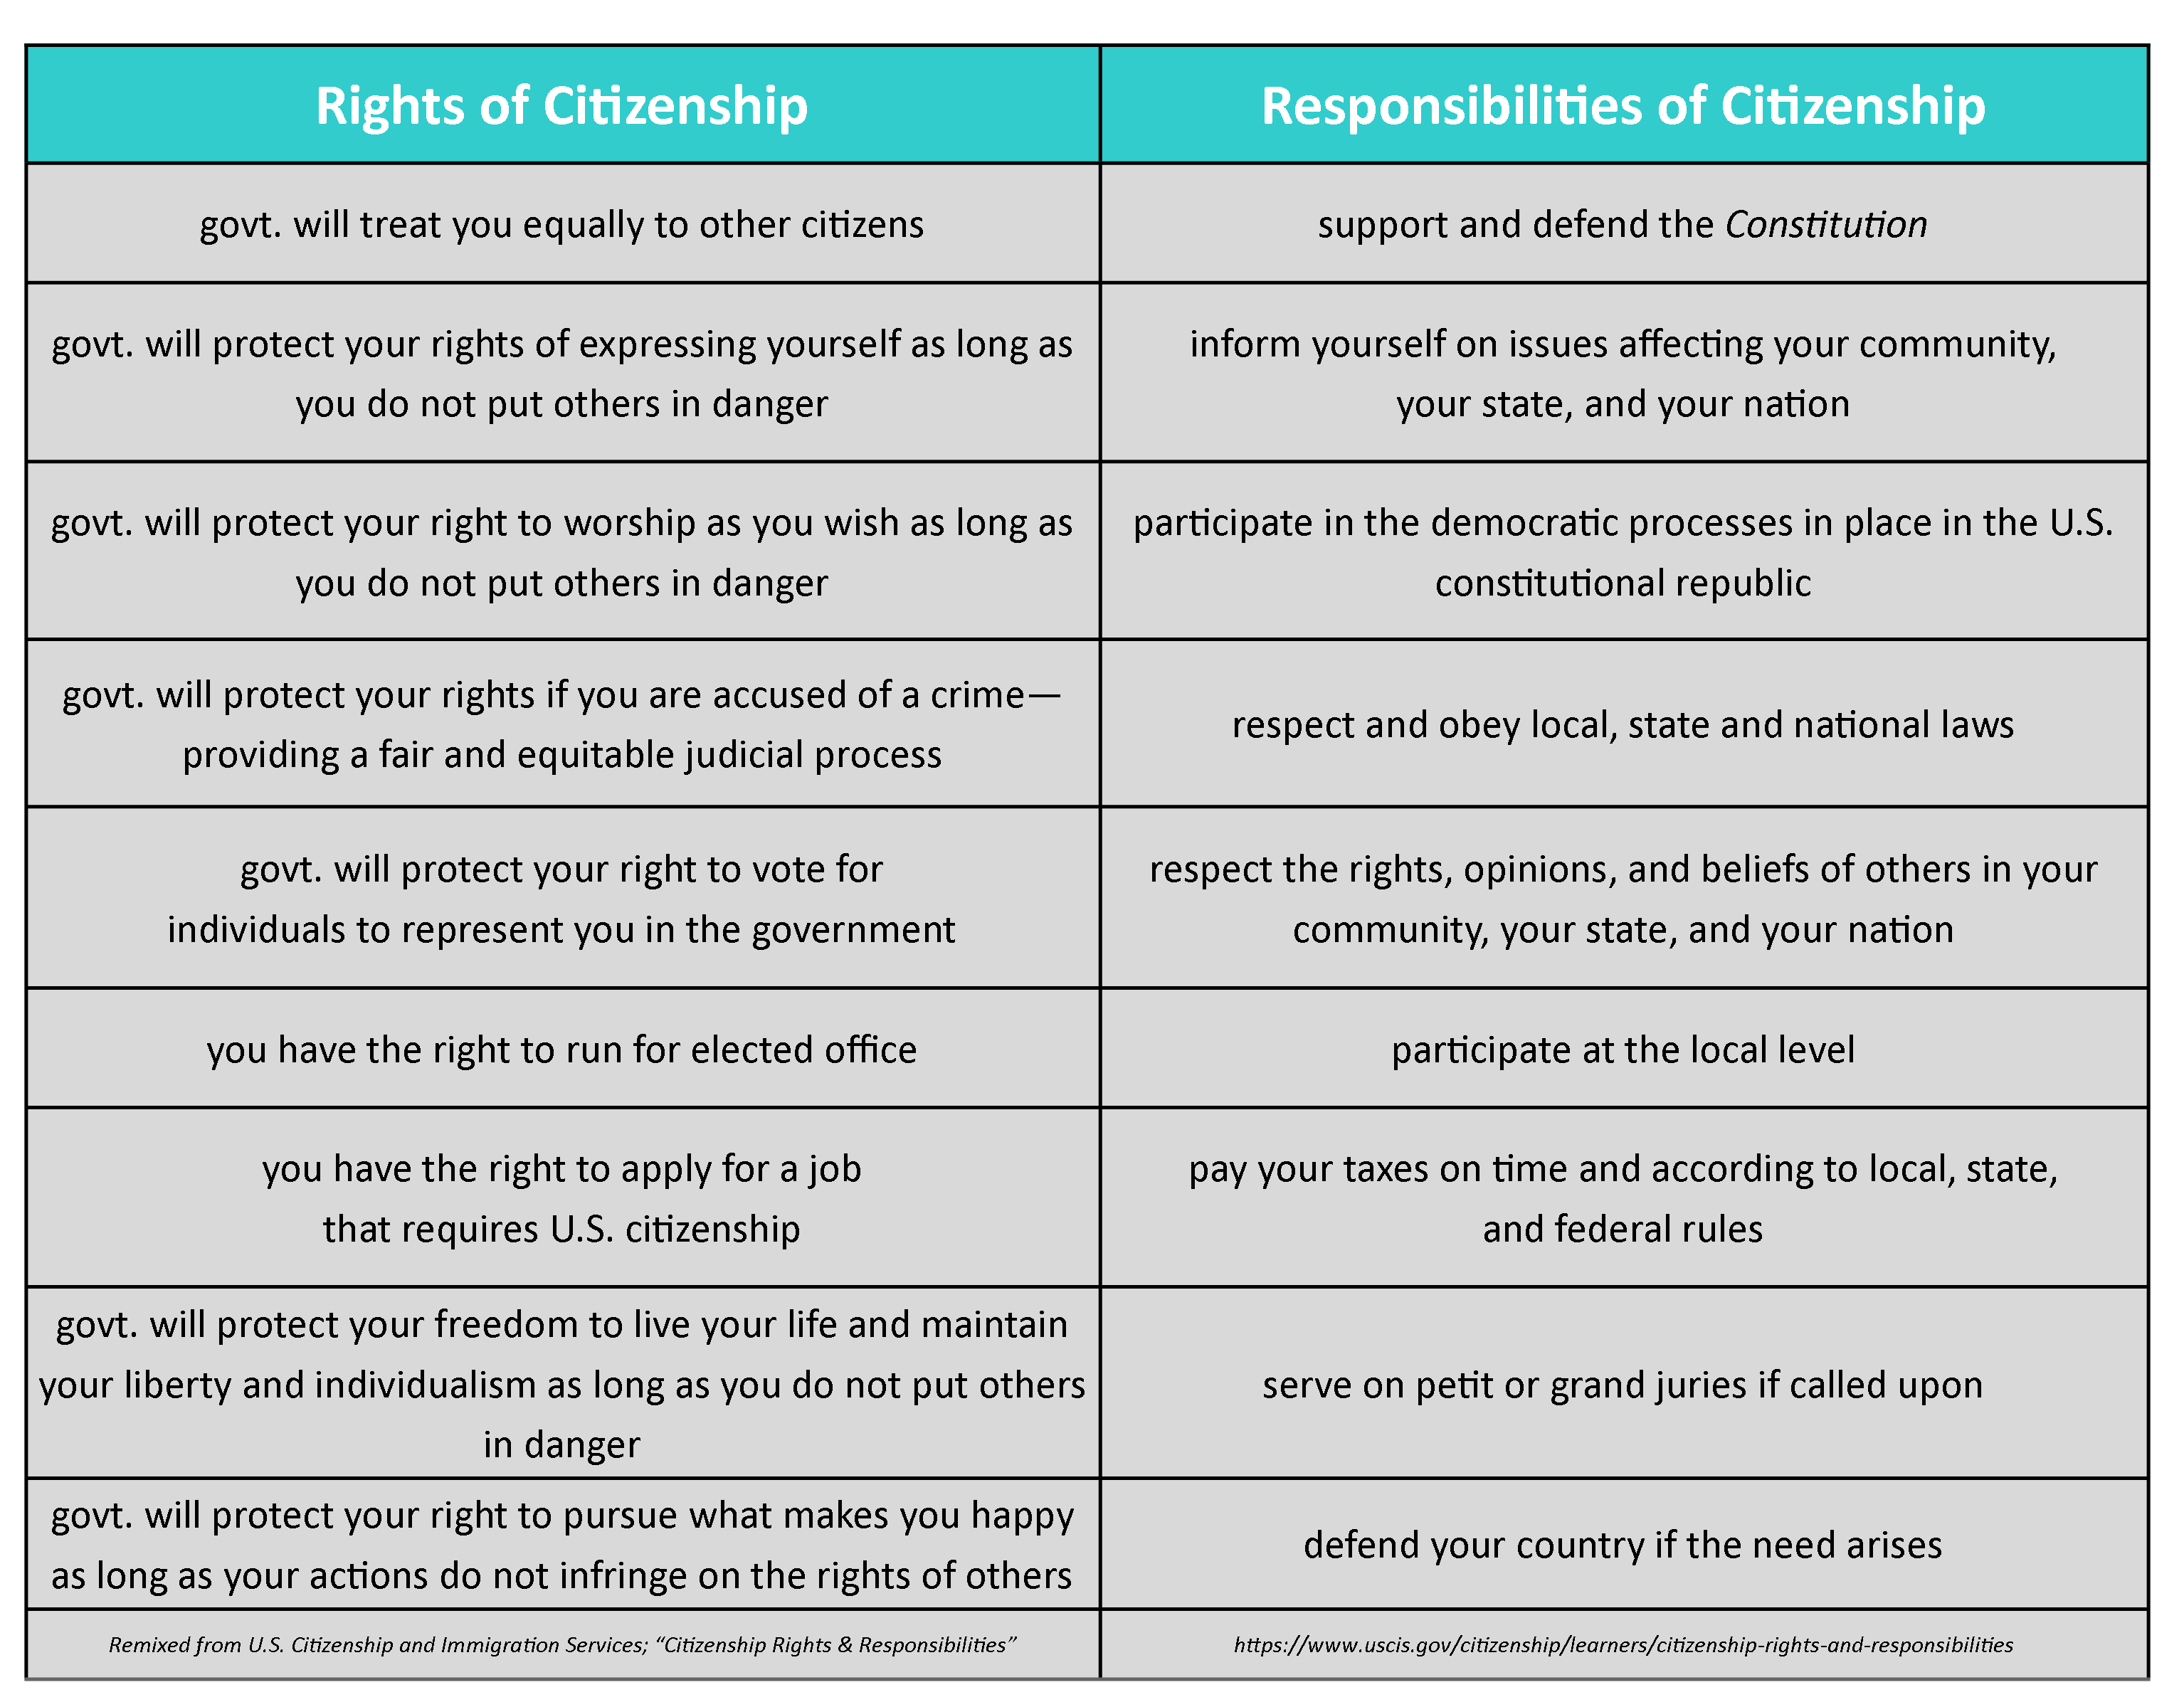 Chart listing rights of citizenship alongside responsibilities of citizenship.